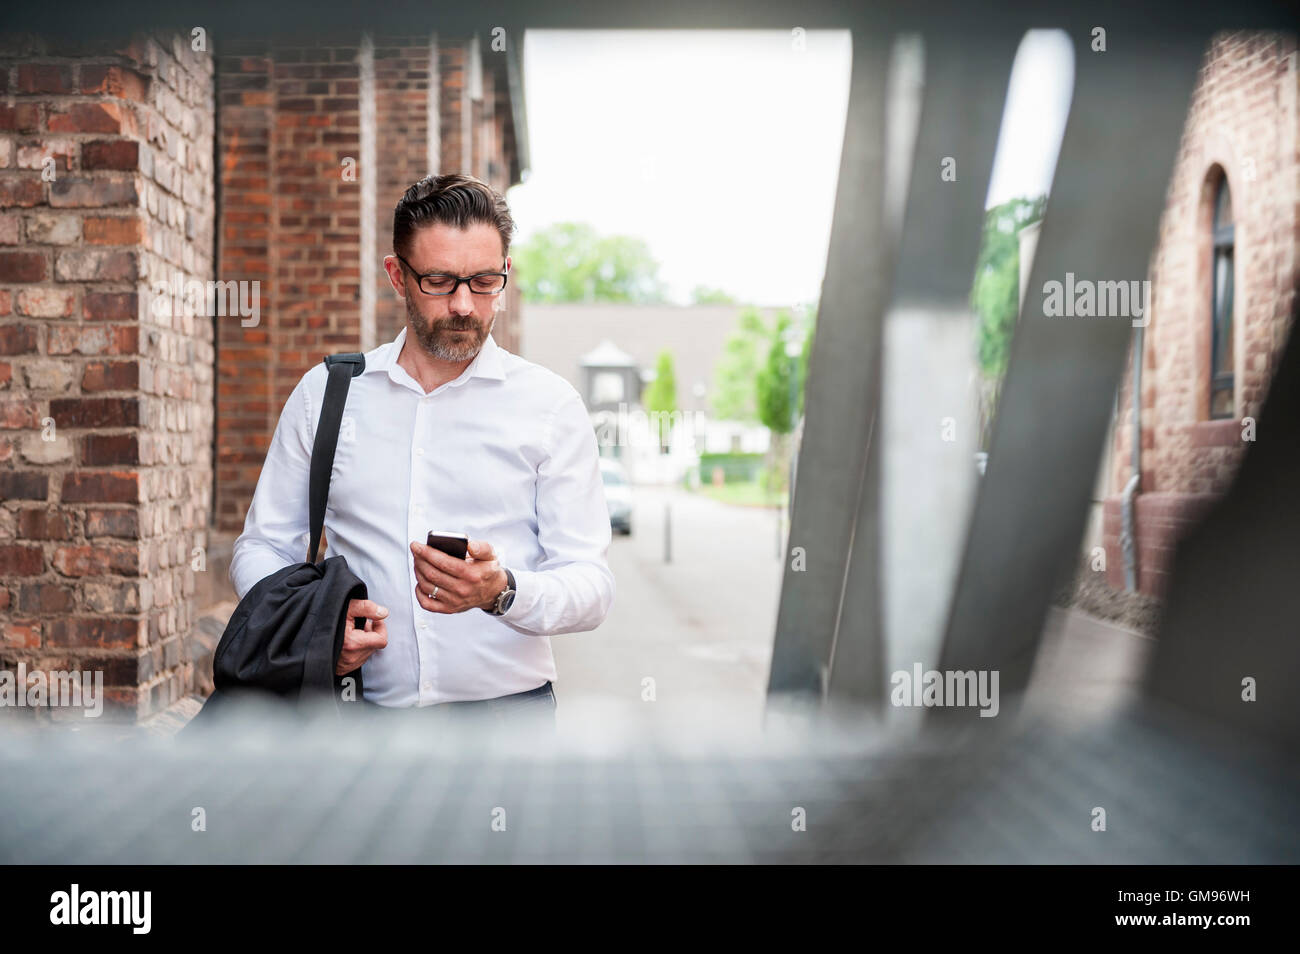 Businessman looking at cell phone Stock Photo